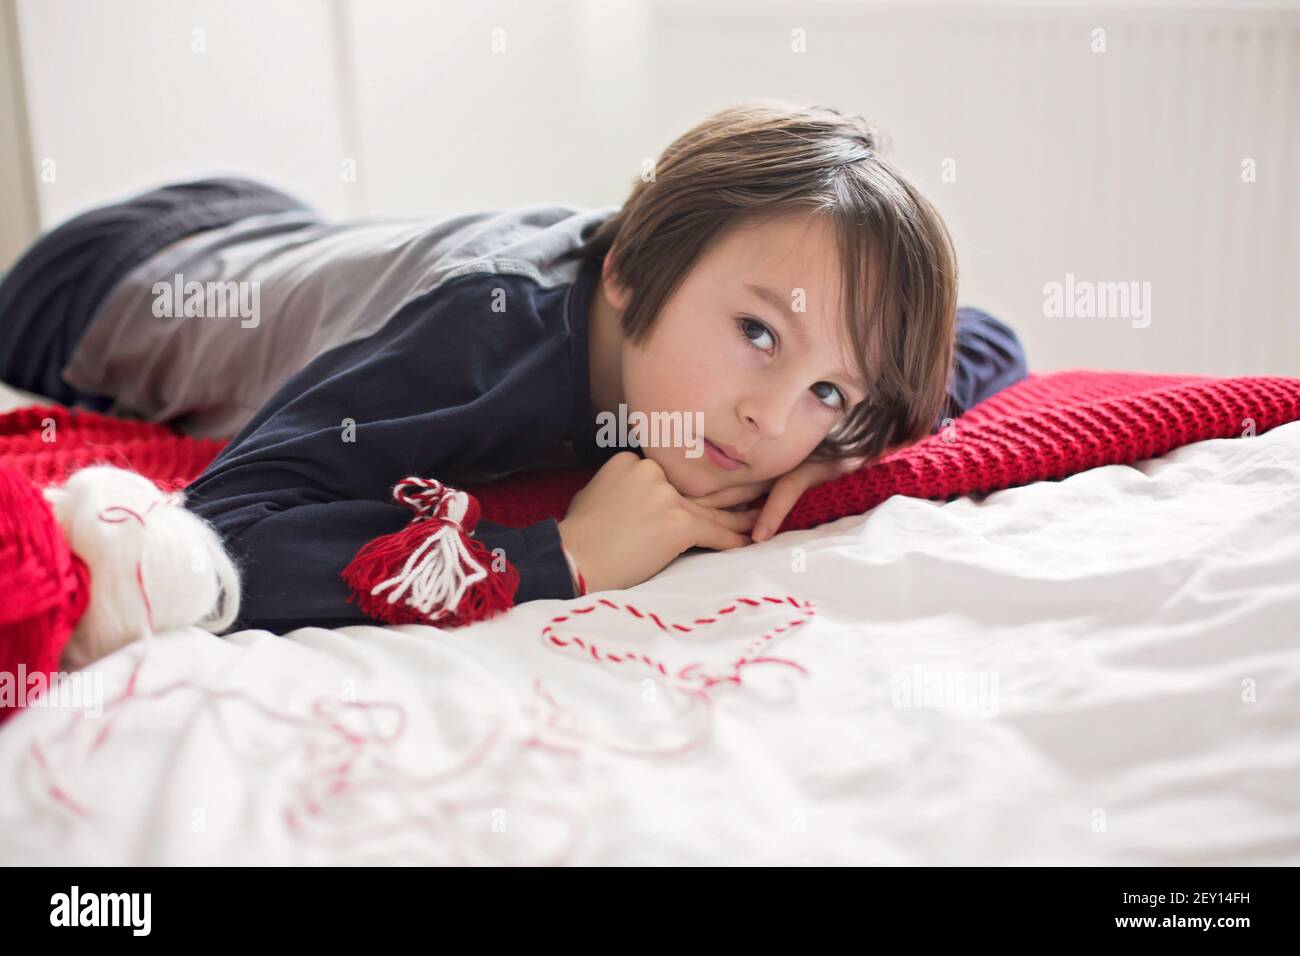 Cute child, blond boy, playing with white and red bracelet, called Martenitsa Stock Photo